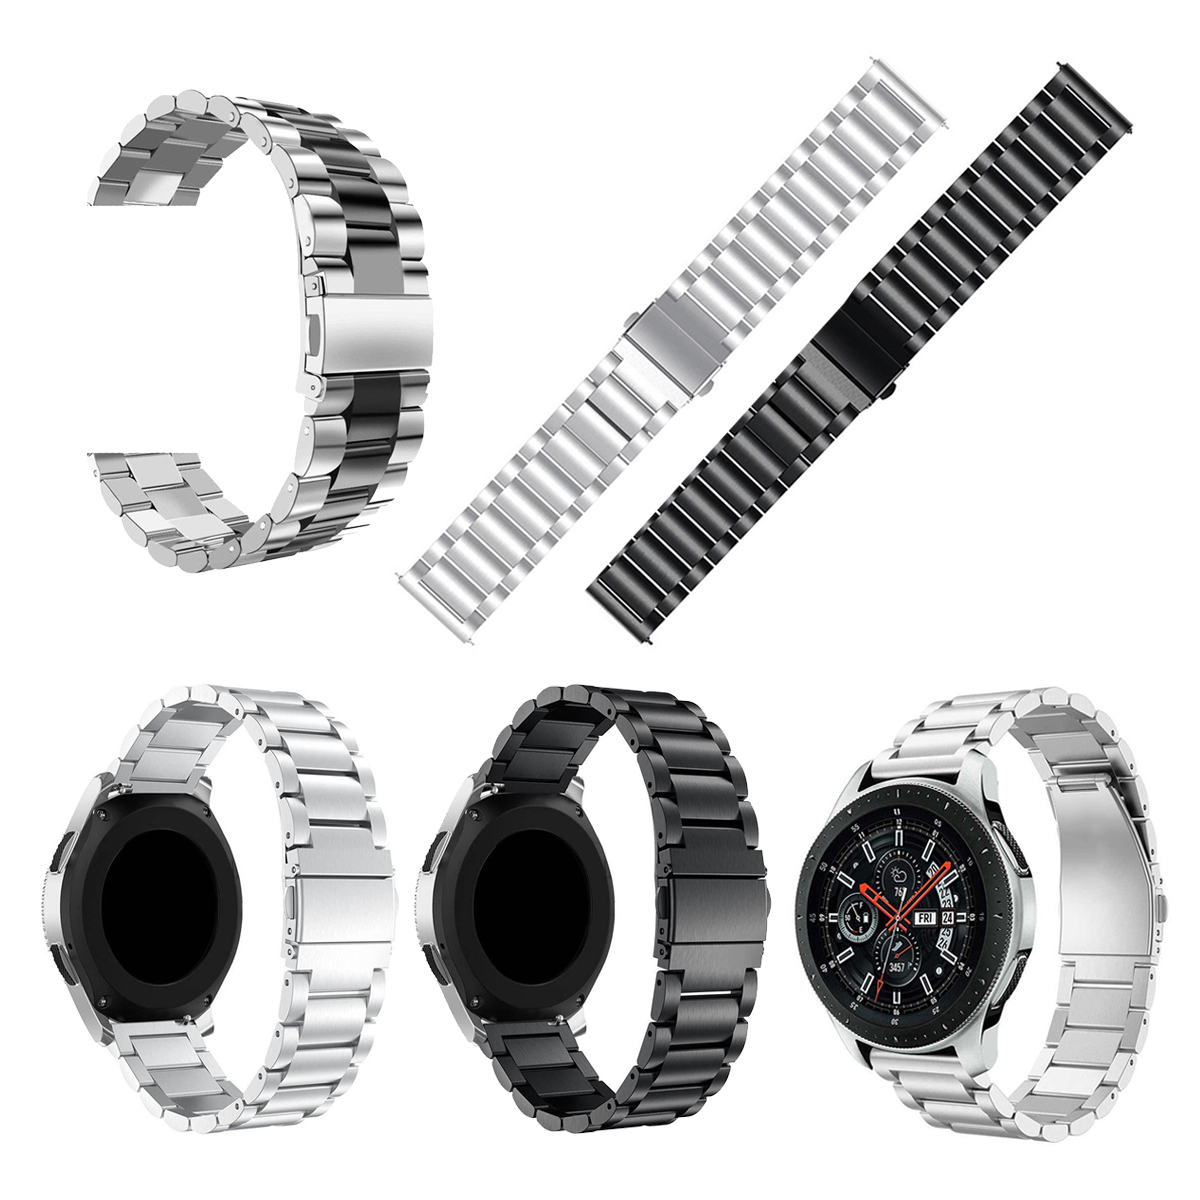 22mm-Stainless-Steel-Watch-Band-Replacement-For-Samsung-Galaxy-Watch-46mm-1402362